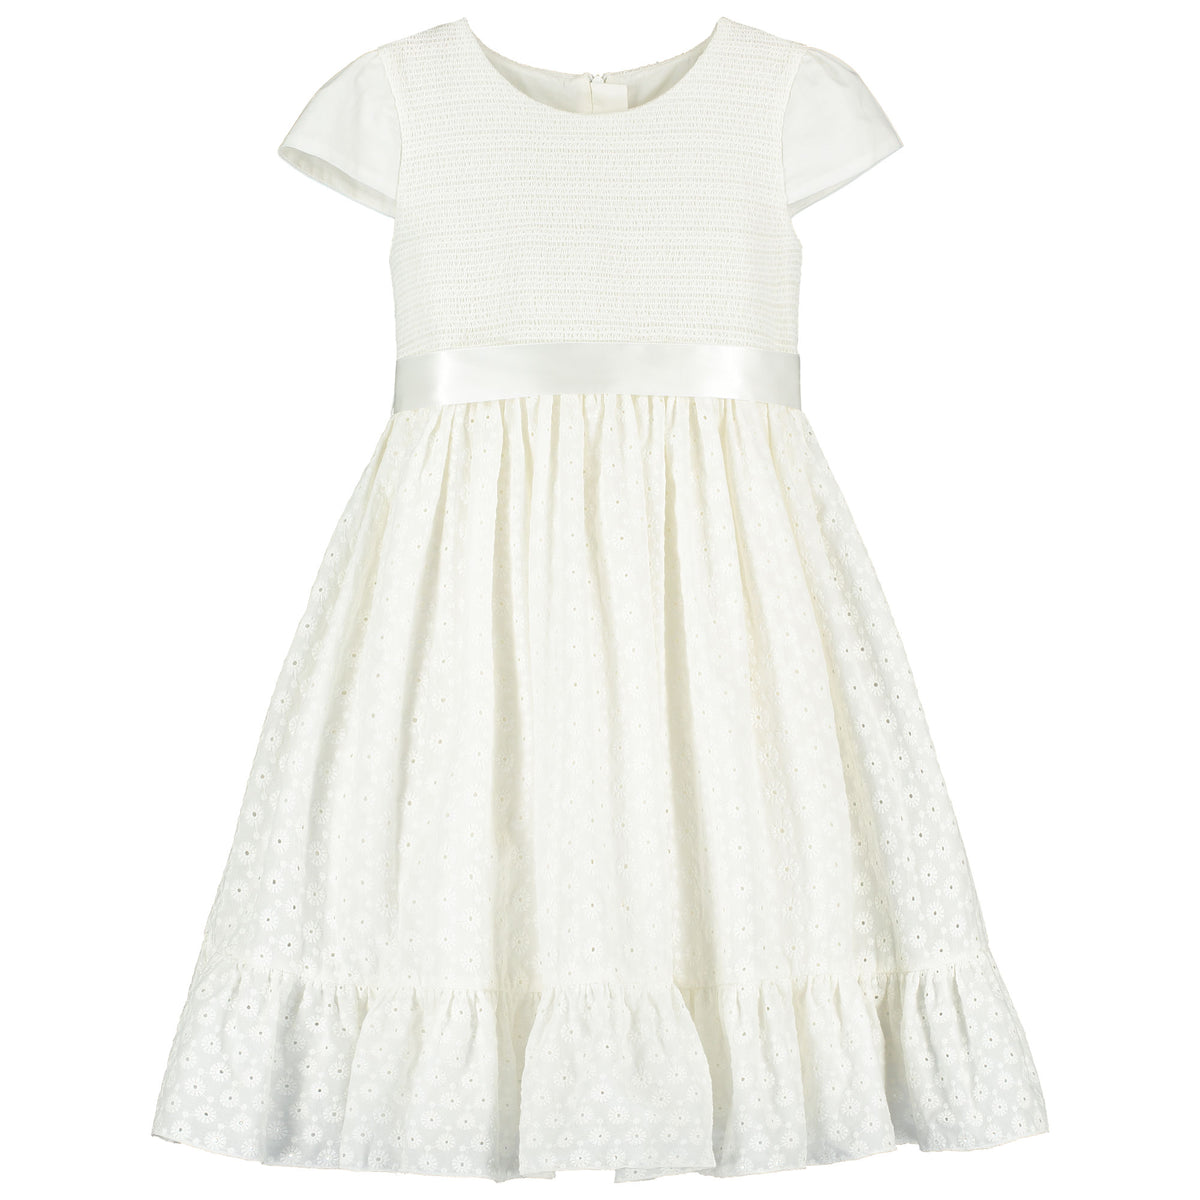 Smocked & Embroidered Cotton Spot Girls Occasion Dress White | Holly Hastie London